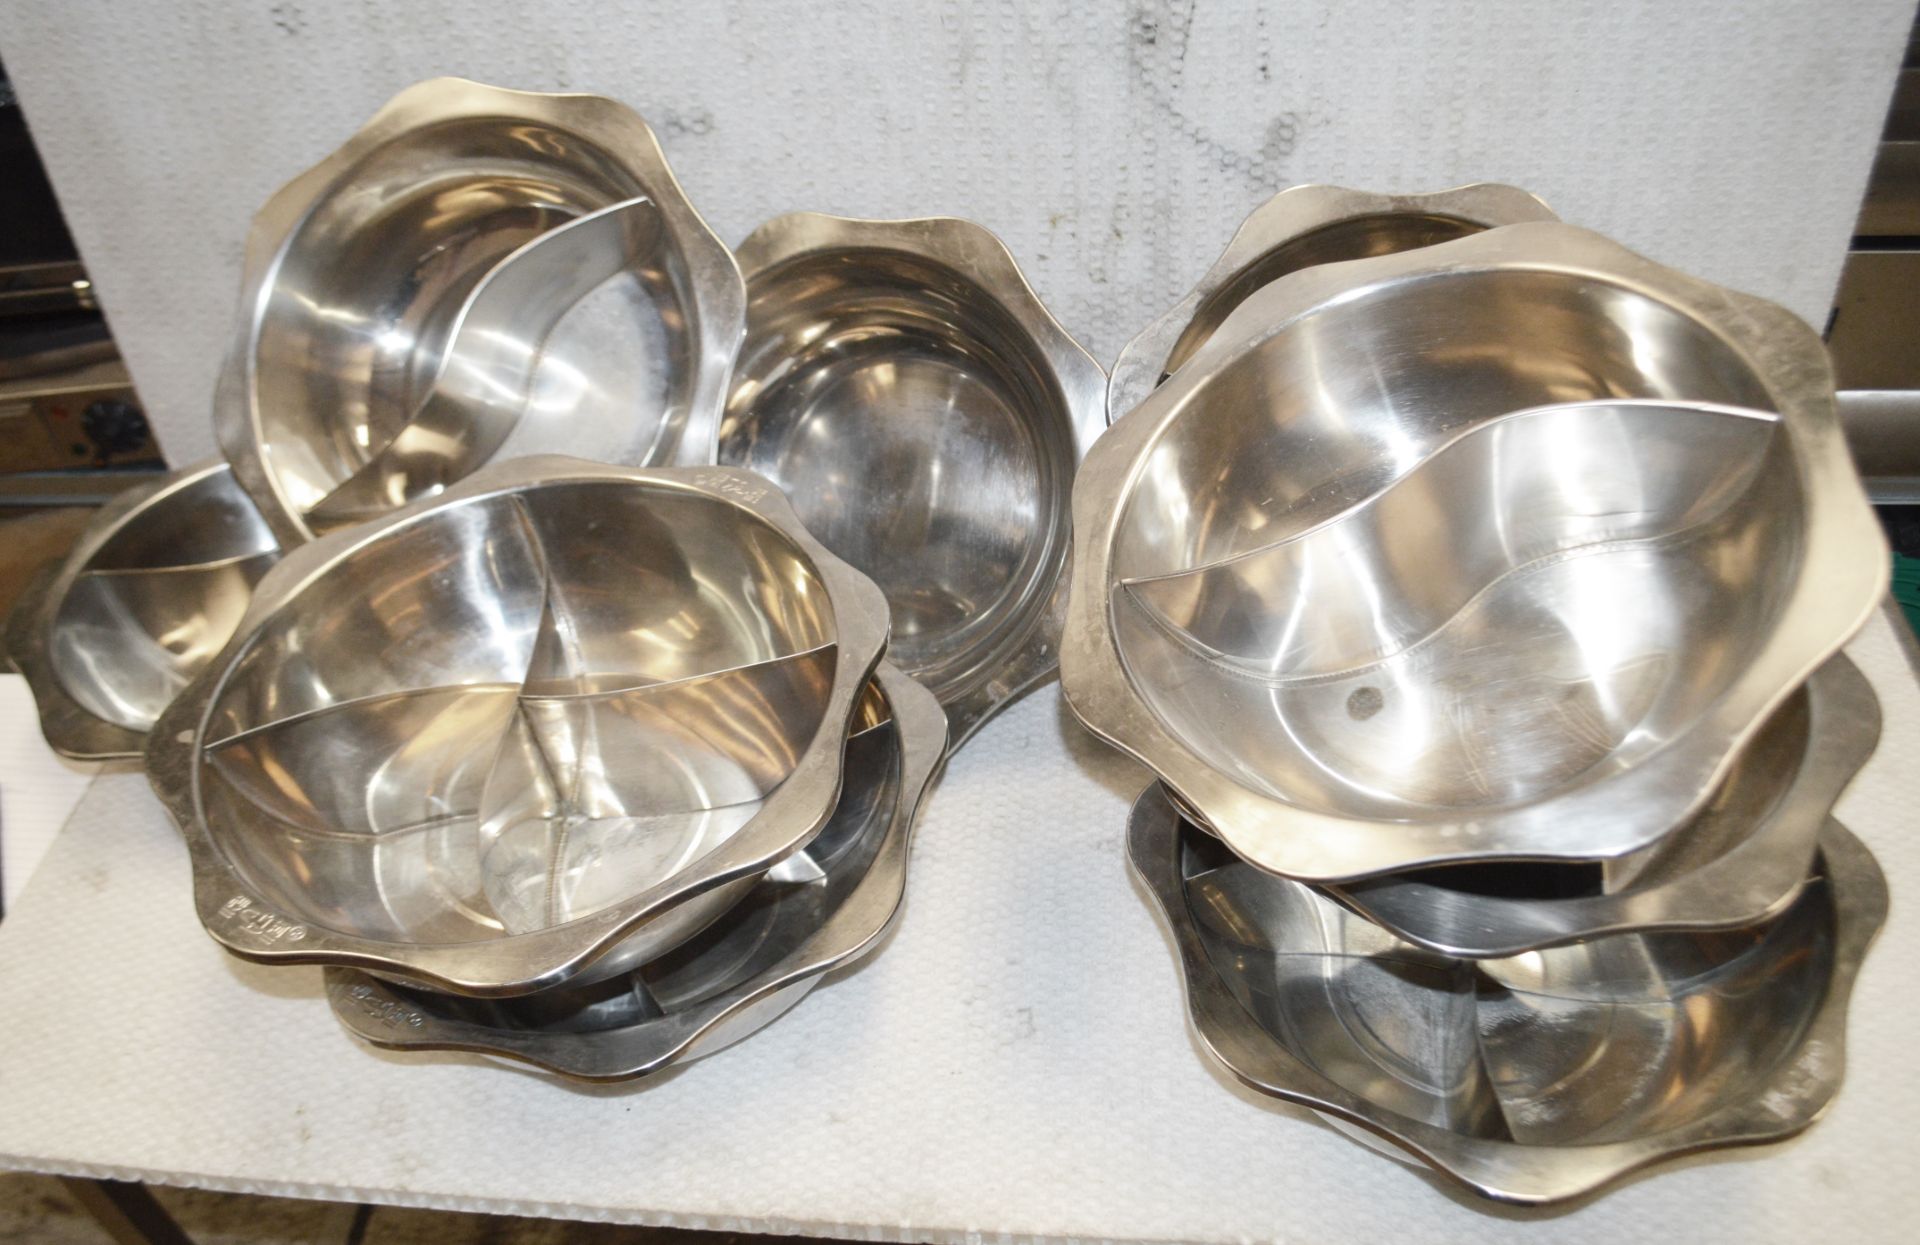 8 x Stainless Steel Buffet Serving Bowls- Dimensions: L37 x W37 x cm - Recently Removed From a - Image 2 of 4